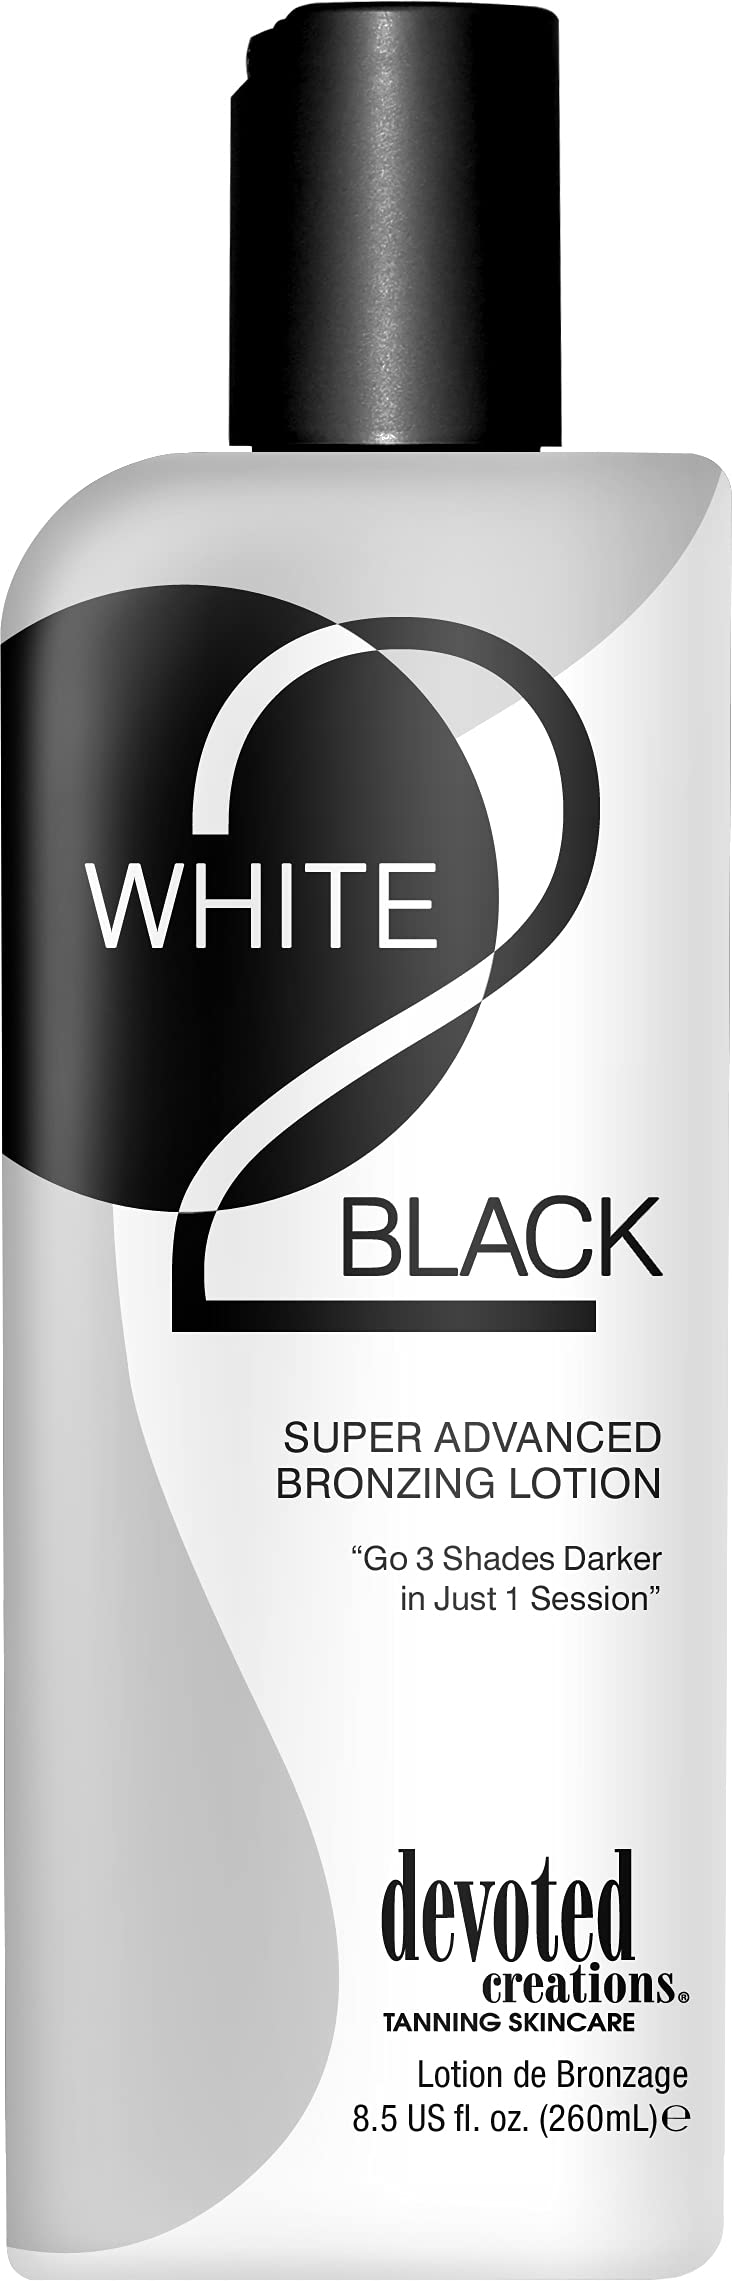 [Australia] - Devoted Creations White 2 Black Supre Advanced Bronzer Tanning Lotion, 8.5 Ounce 